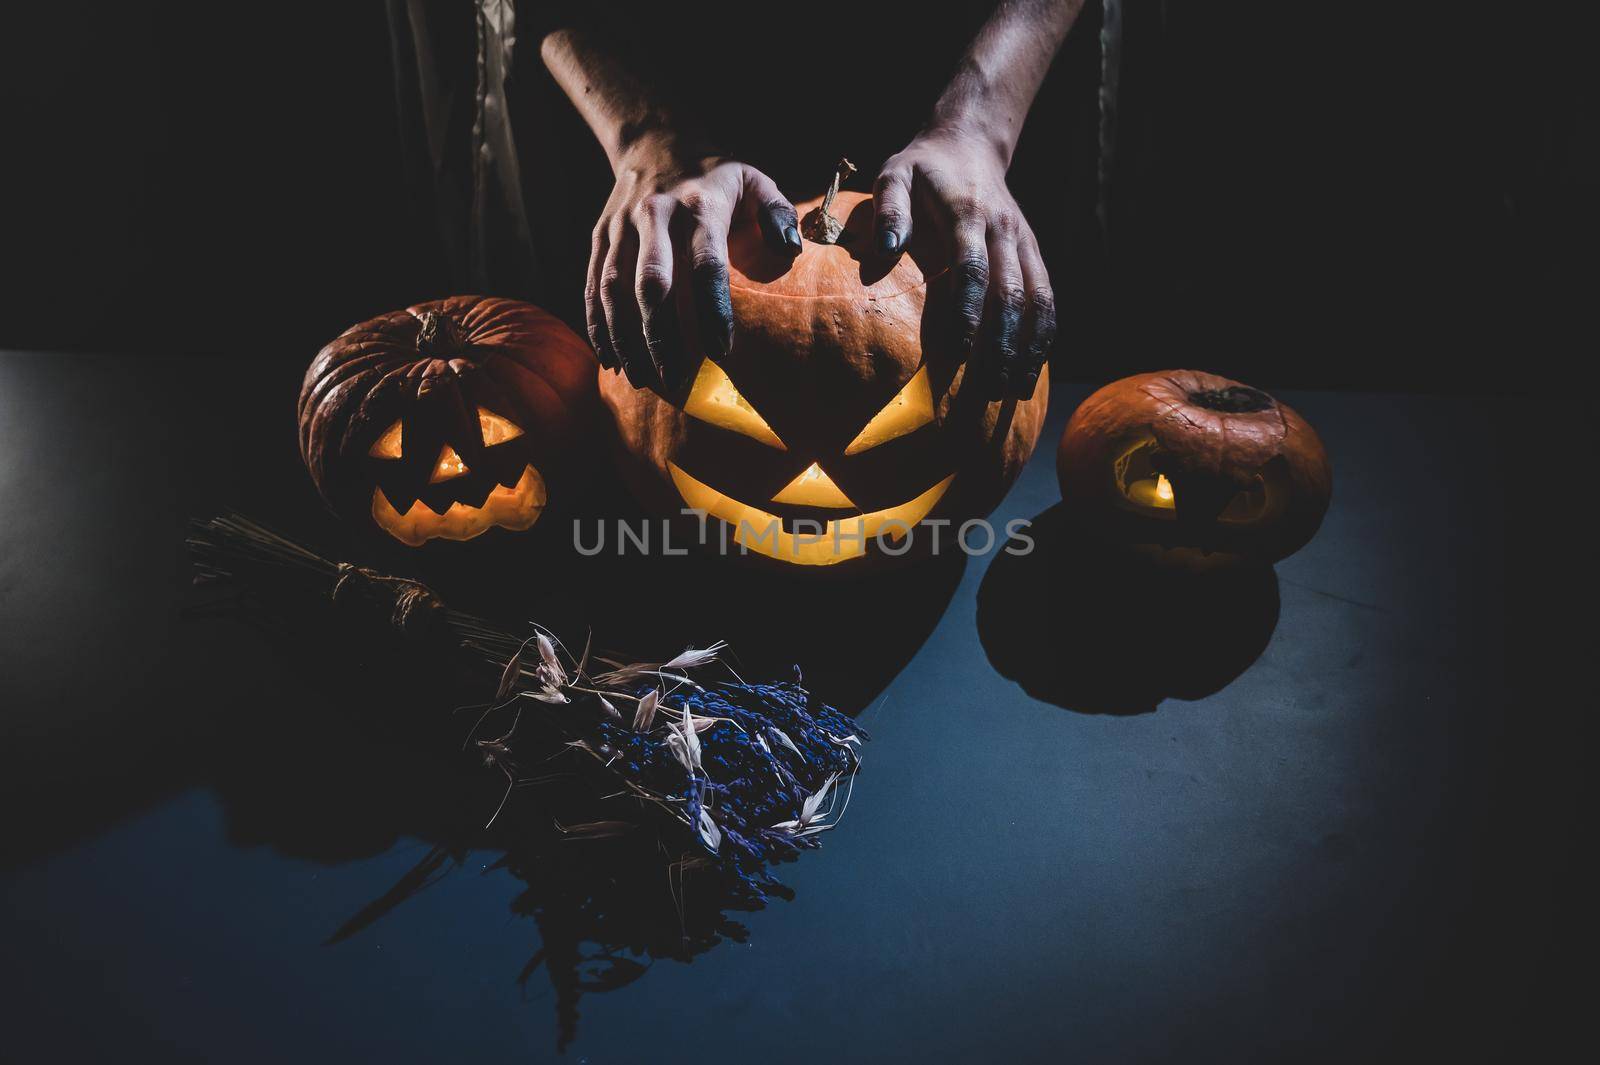 Close-up of female hands holding a halloween pumpkin in the dark.